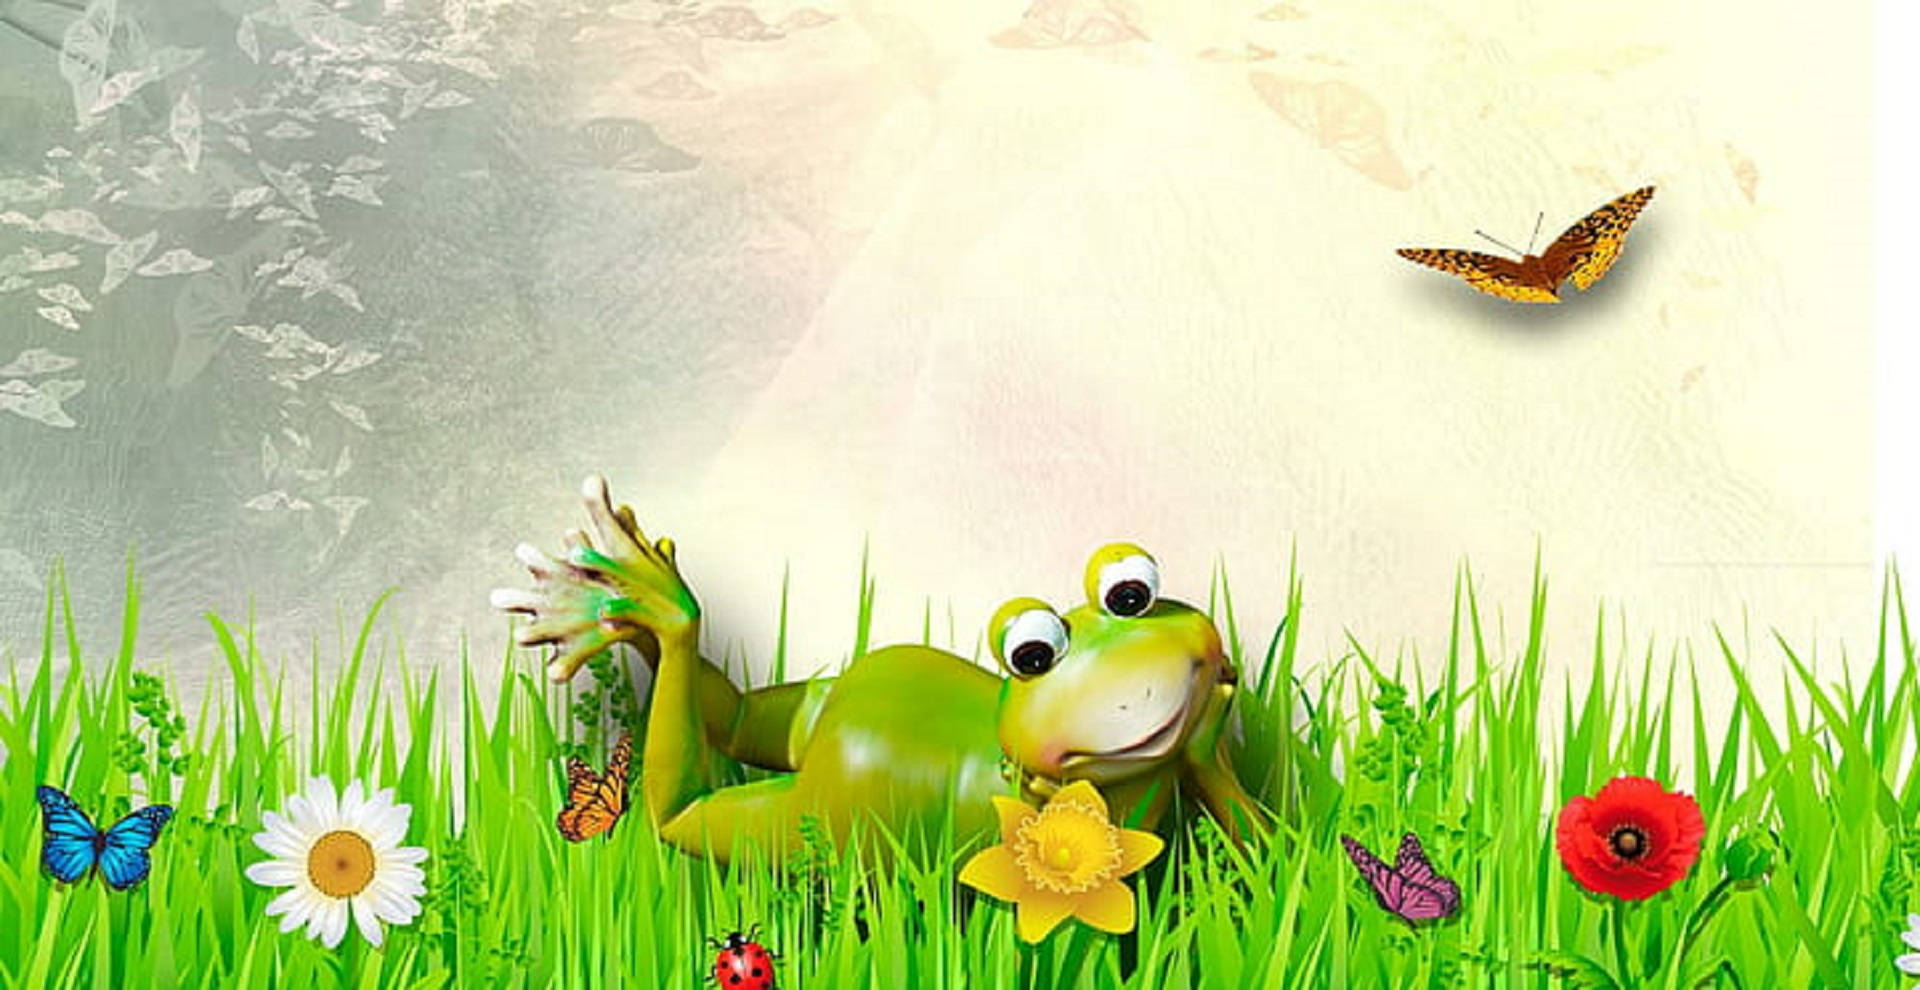 Download Whimsical Frog In Grass Wallpaper